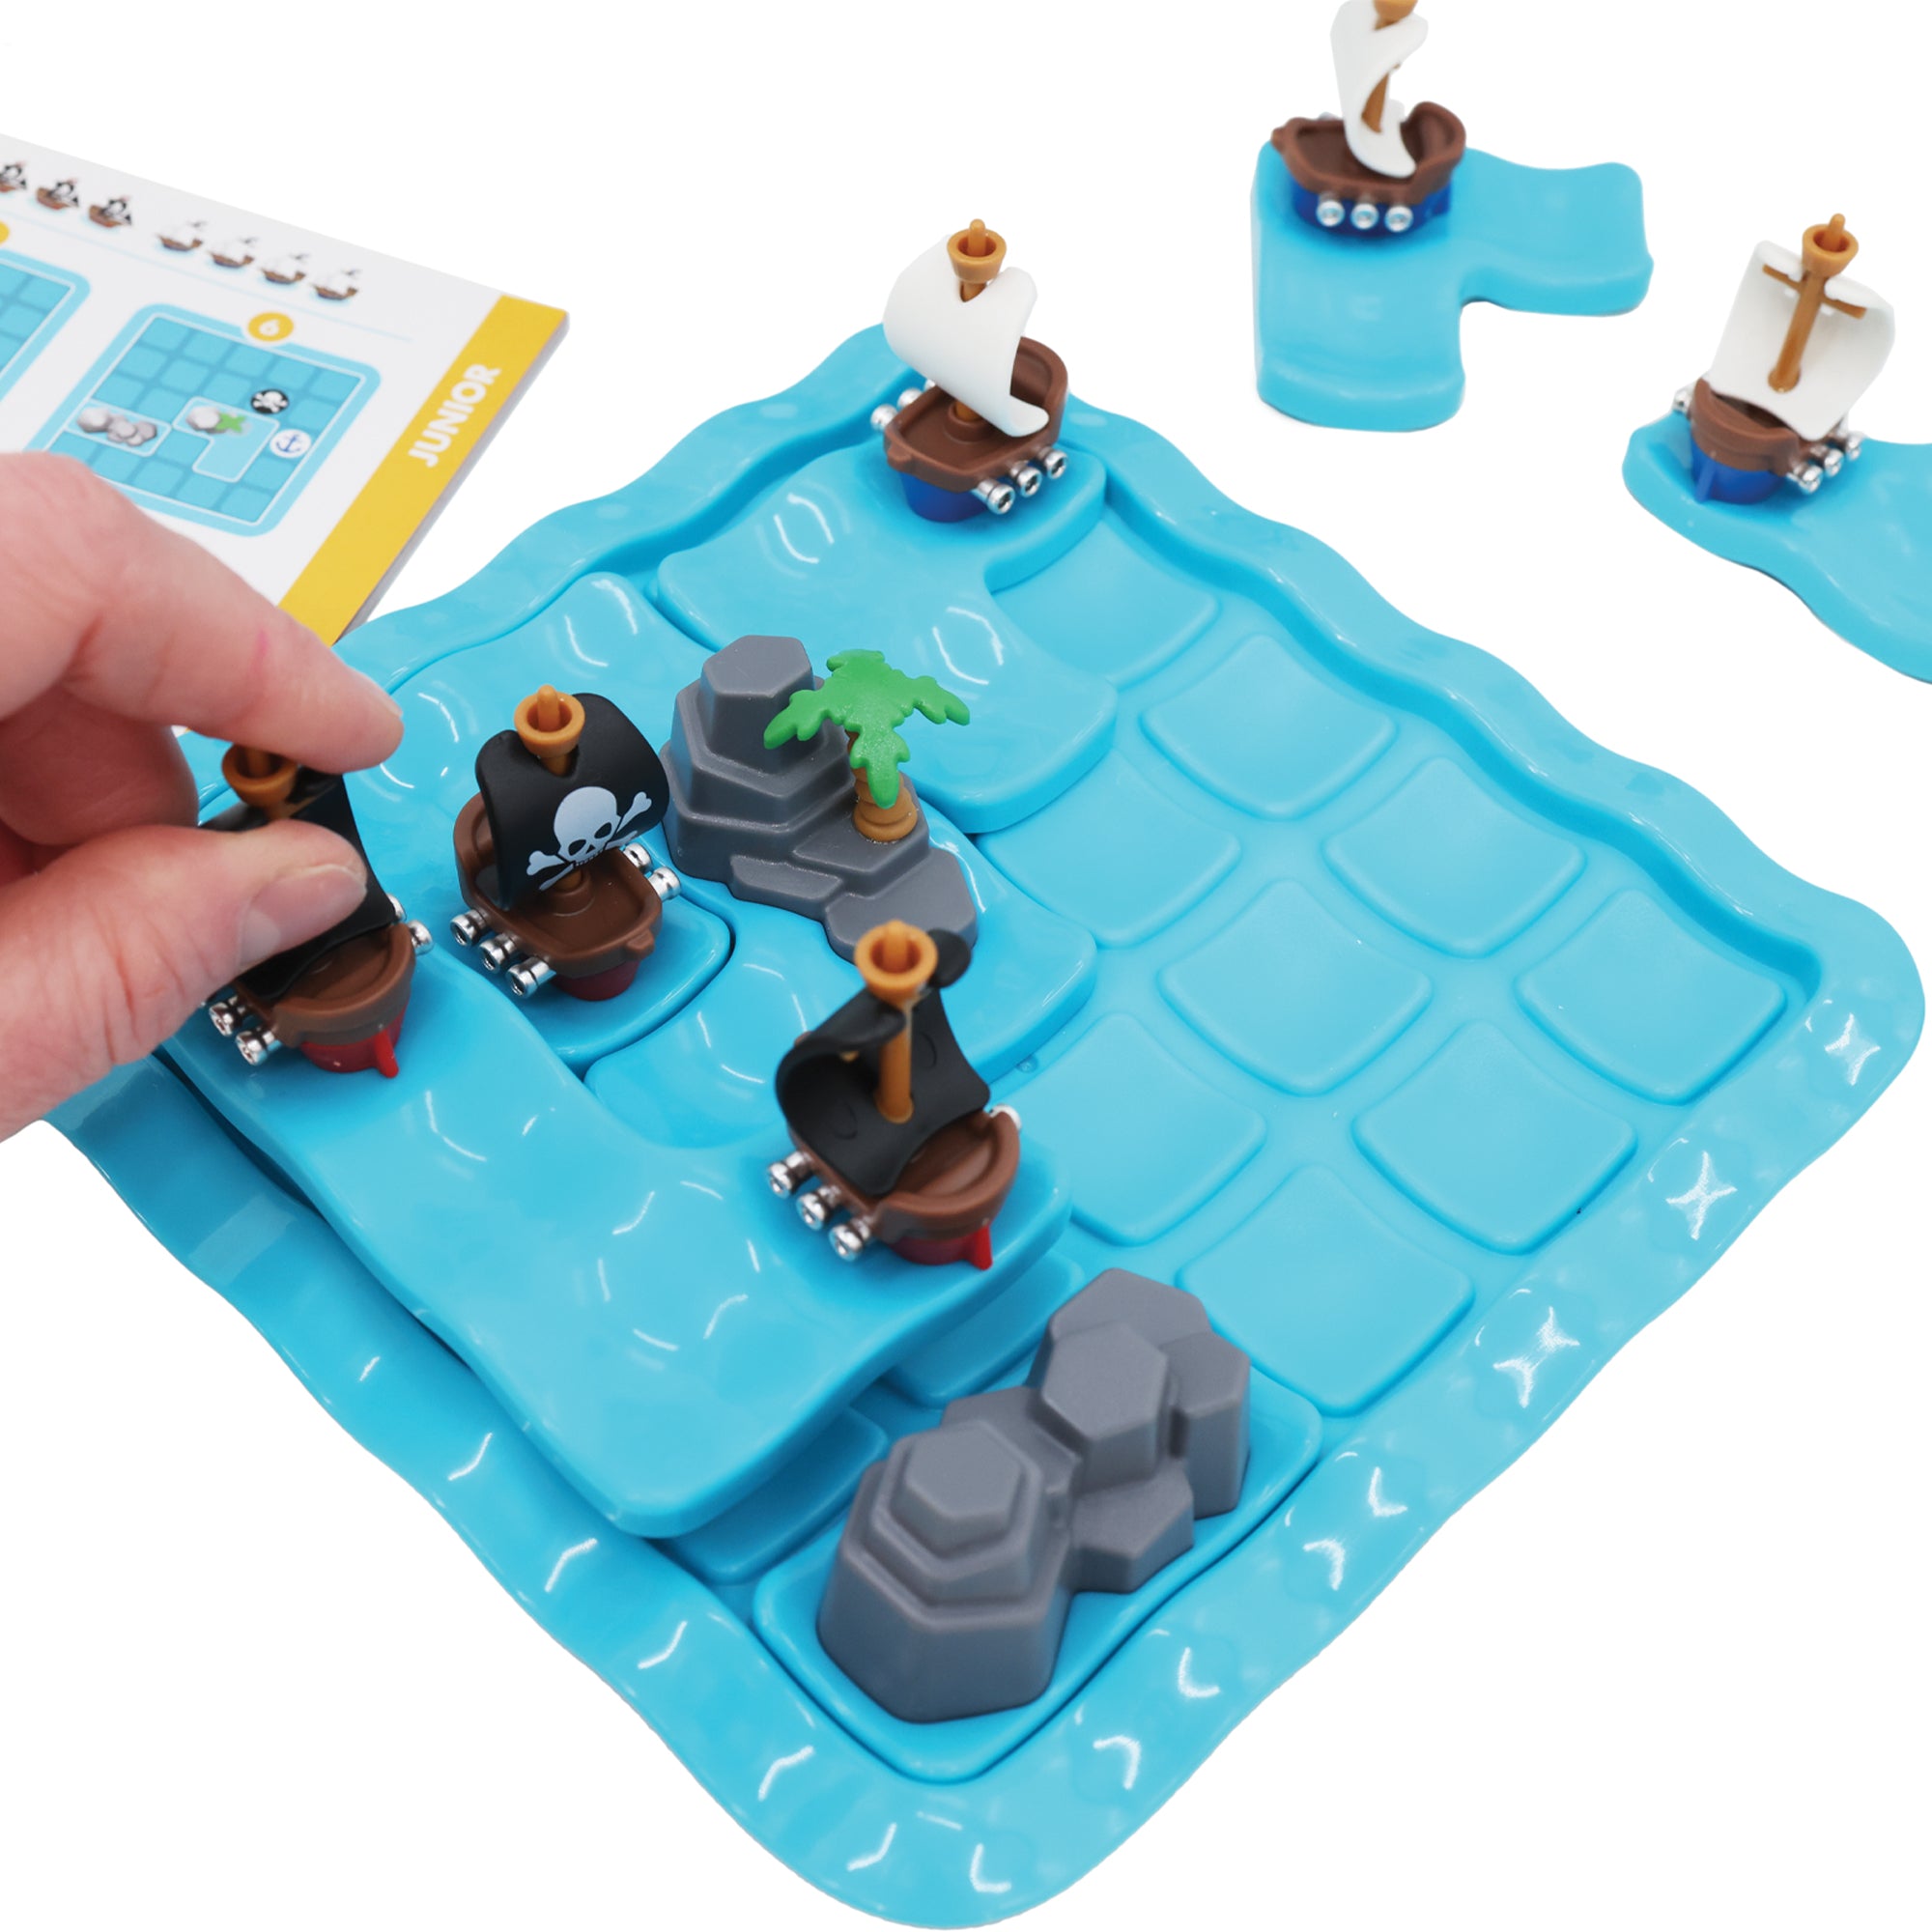 A hand putting a ship piece in place on the Pirates Crossfire game board. The gameboard is blue and wavy in a square shape with rounded corners. There are 4 ship and rock pieces set in place on the board. There are 2 ship pieces off the board to the top. On the left is the instruction booklet open to a junior puzzle.